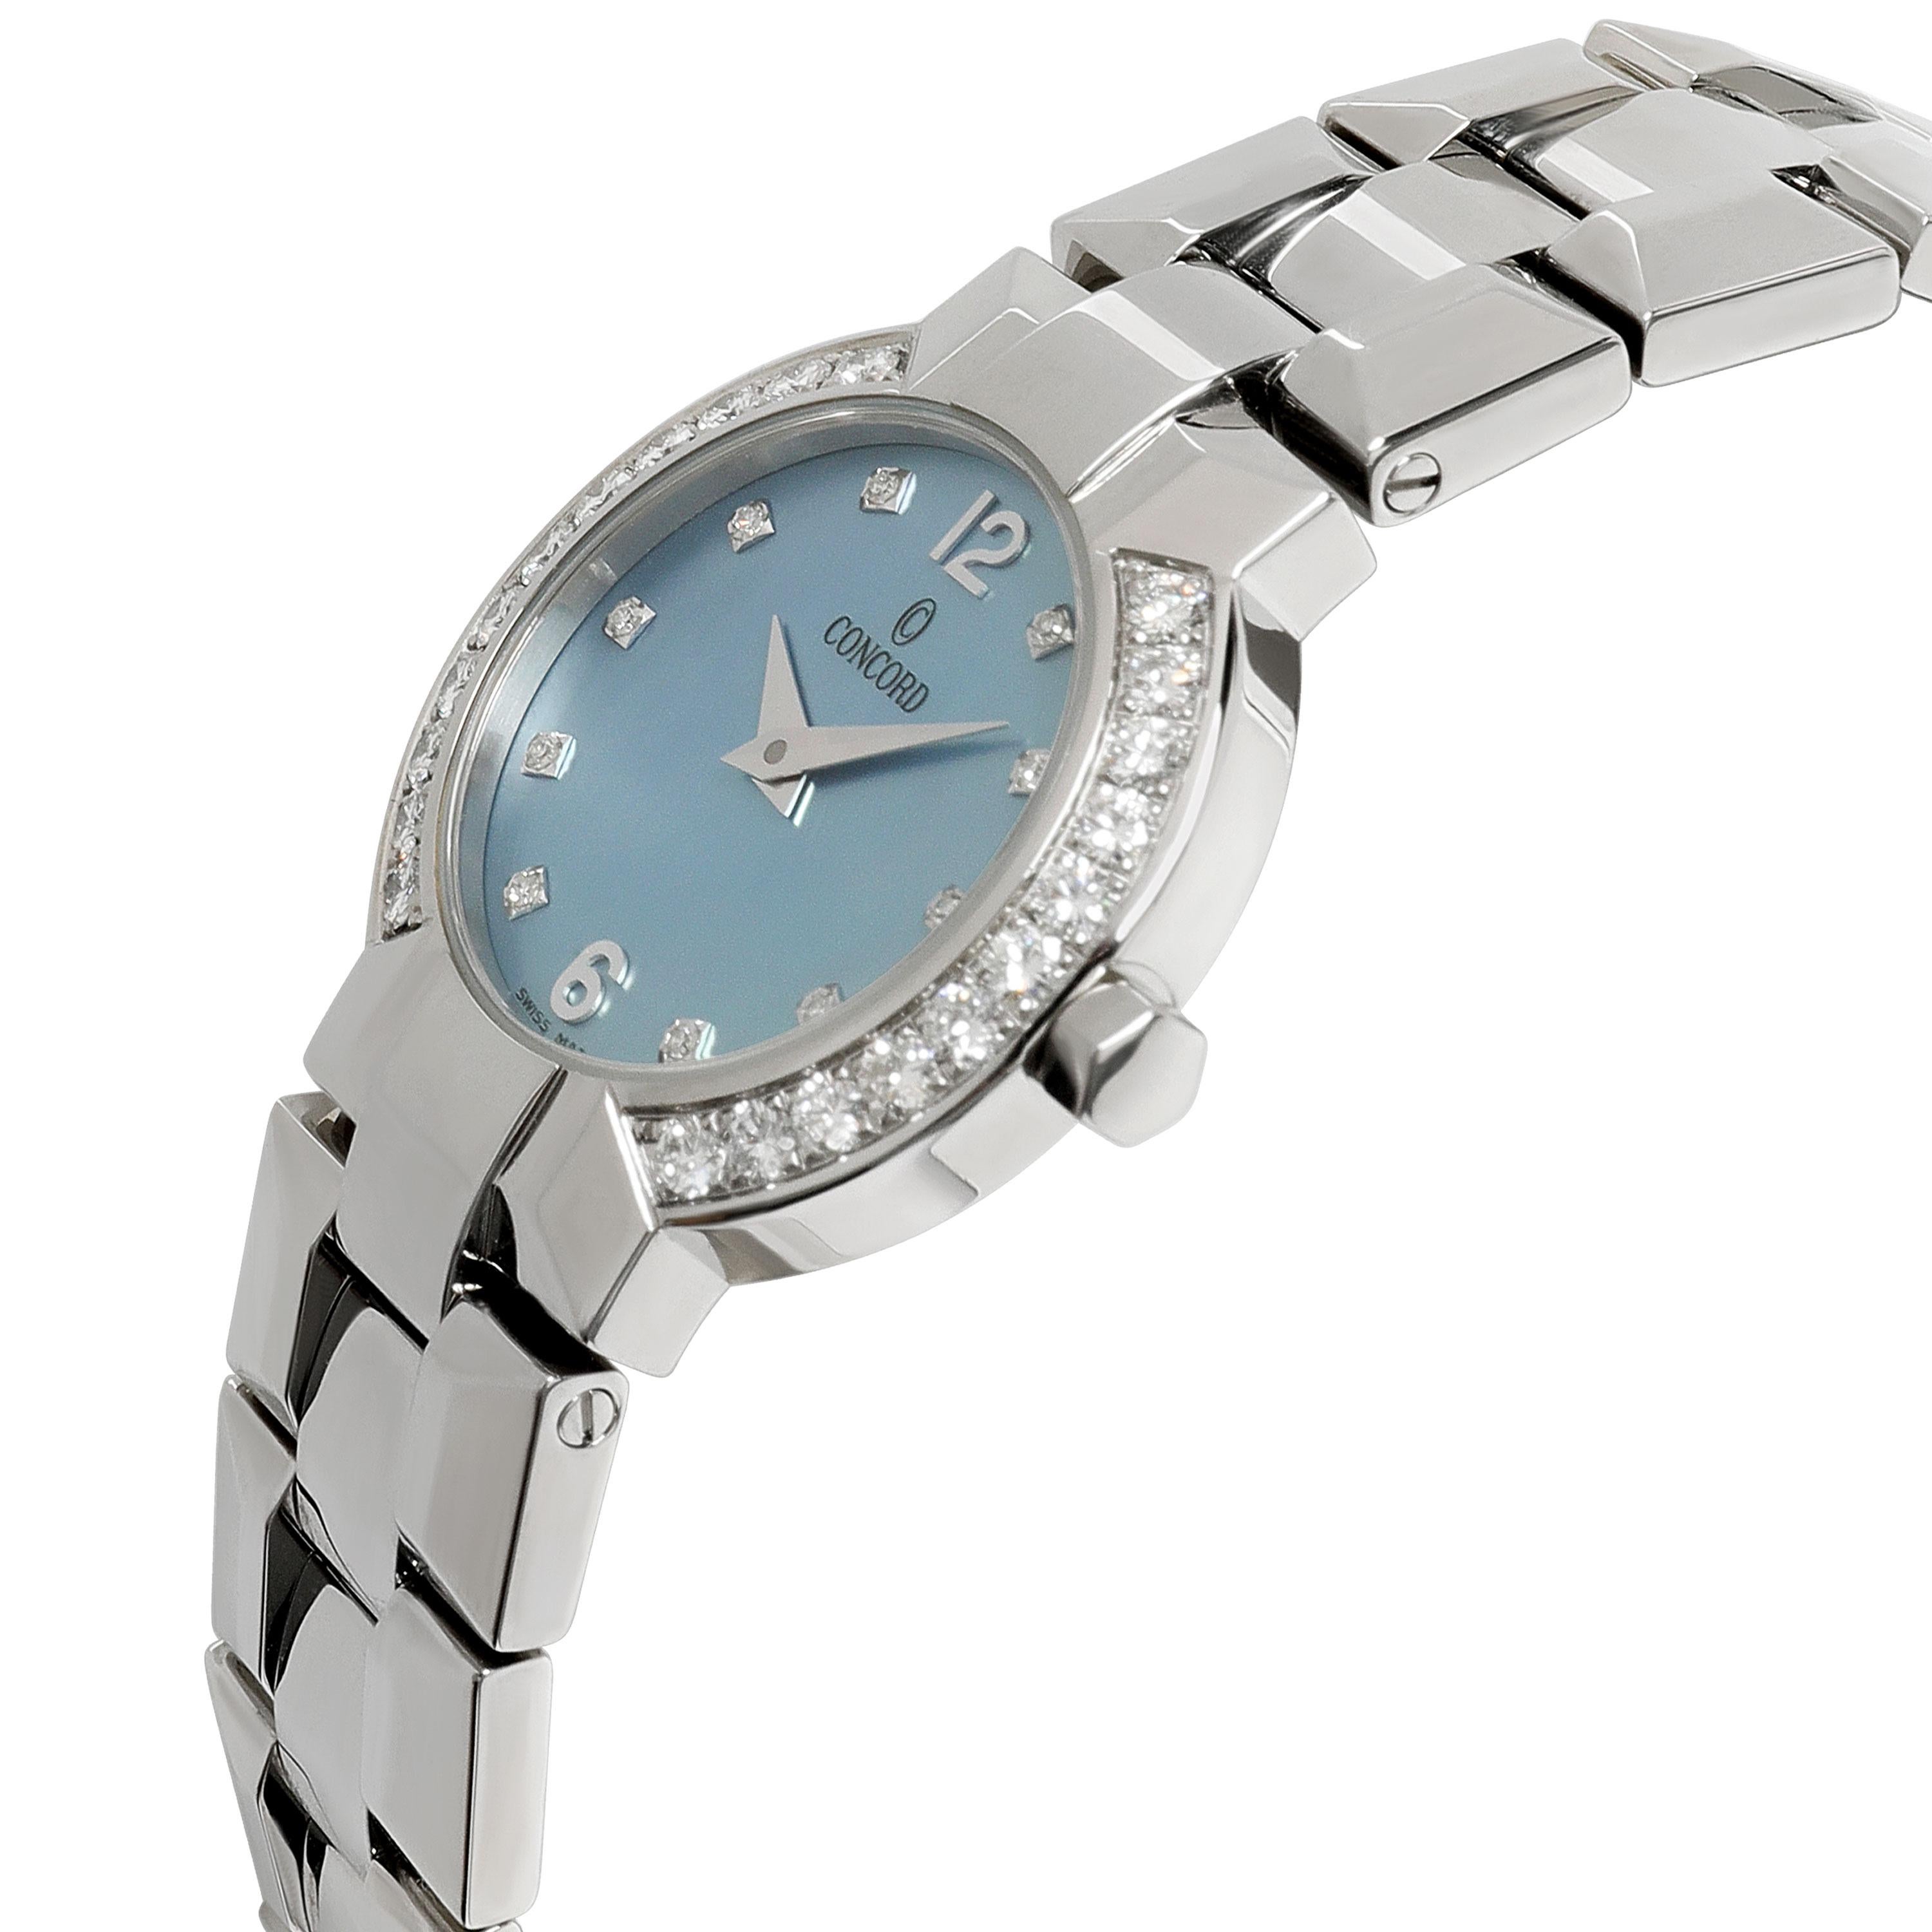 Concord La Scala 14.G4.1843.S Women's Watch in  Stainless Steel

SKU: 115748

PRIMARY DETAILS
Brand: Concord
Model: La Scala
Country of Origin: Switzerland
Movement Type: Quartz: Battery
Year of Manufacture: 2010-2019
Condition: Retail price 5,900